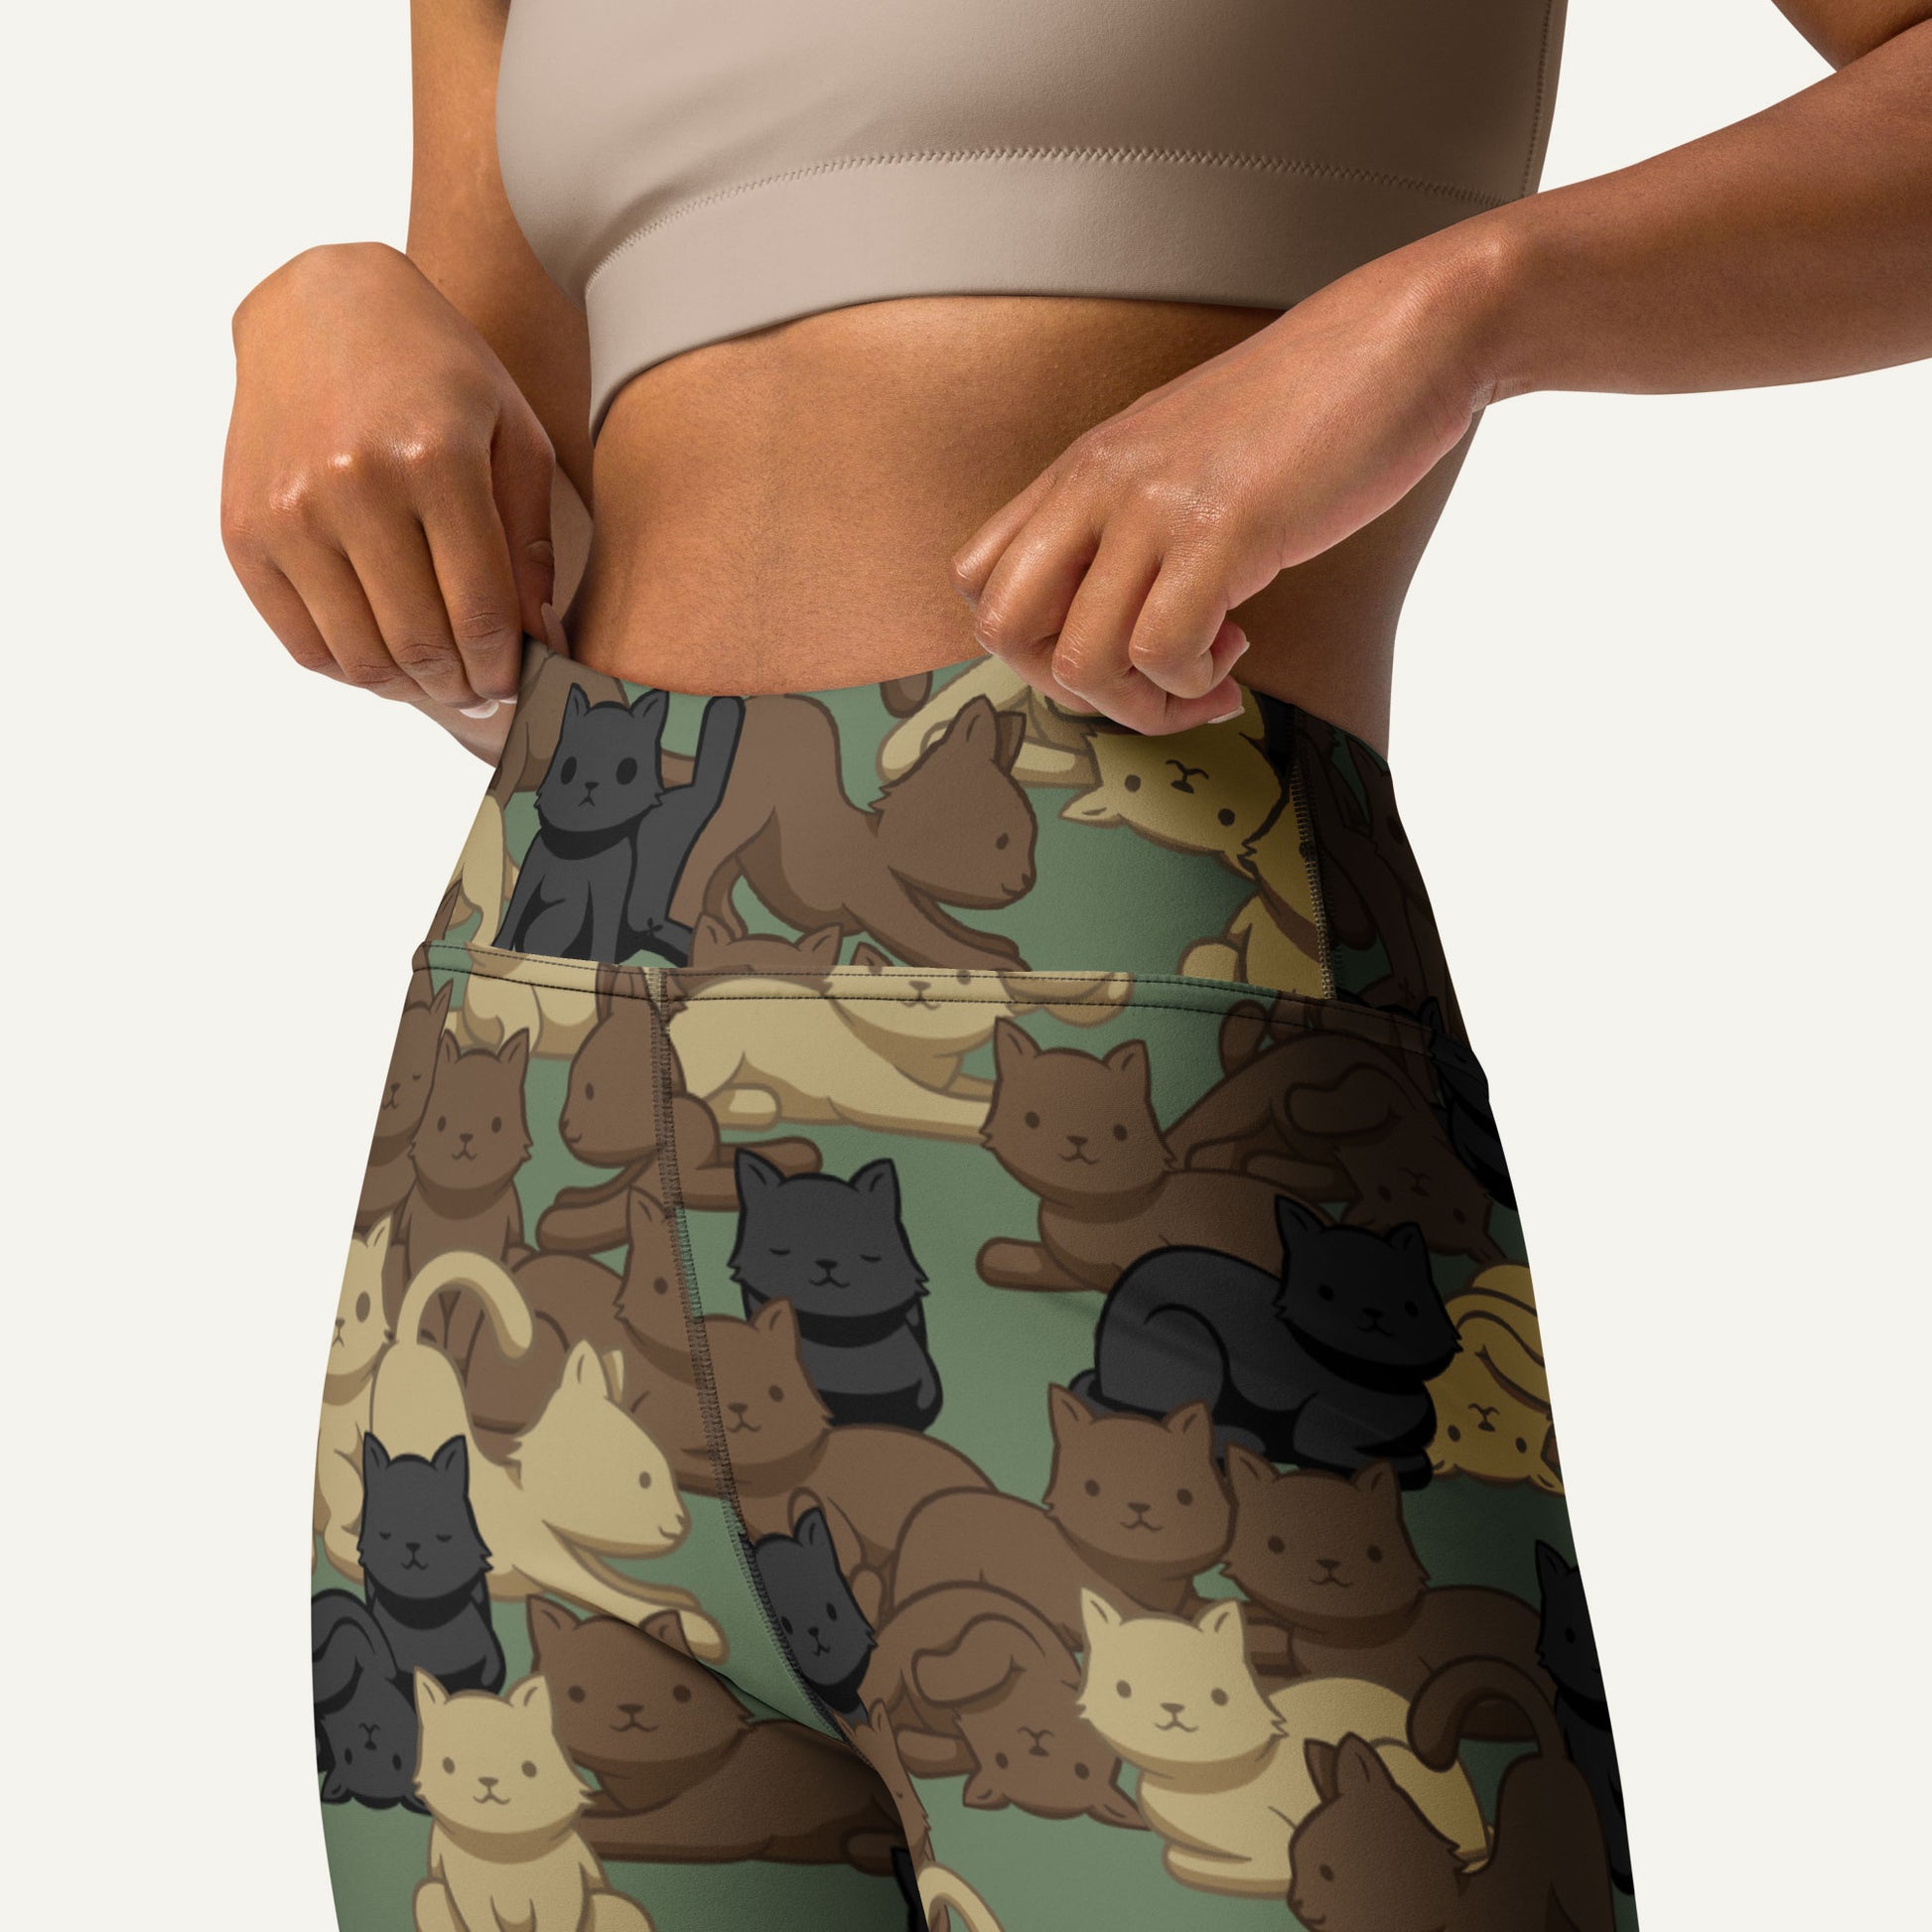 Cats Camouflage Woodland High-Waisted Crossover Leggings With